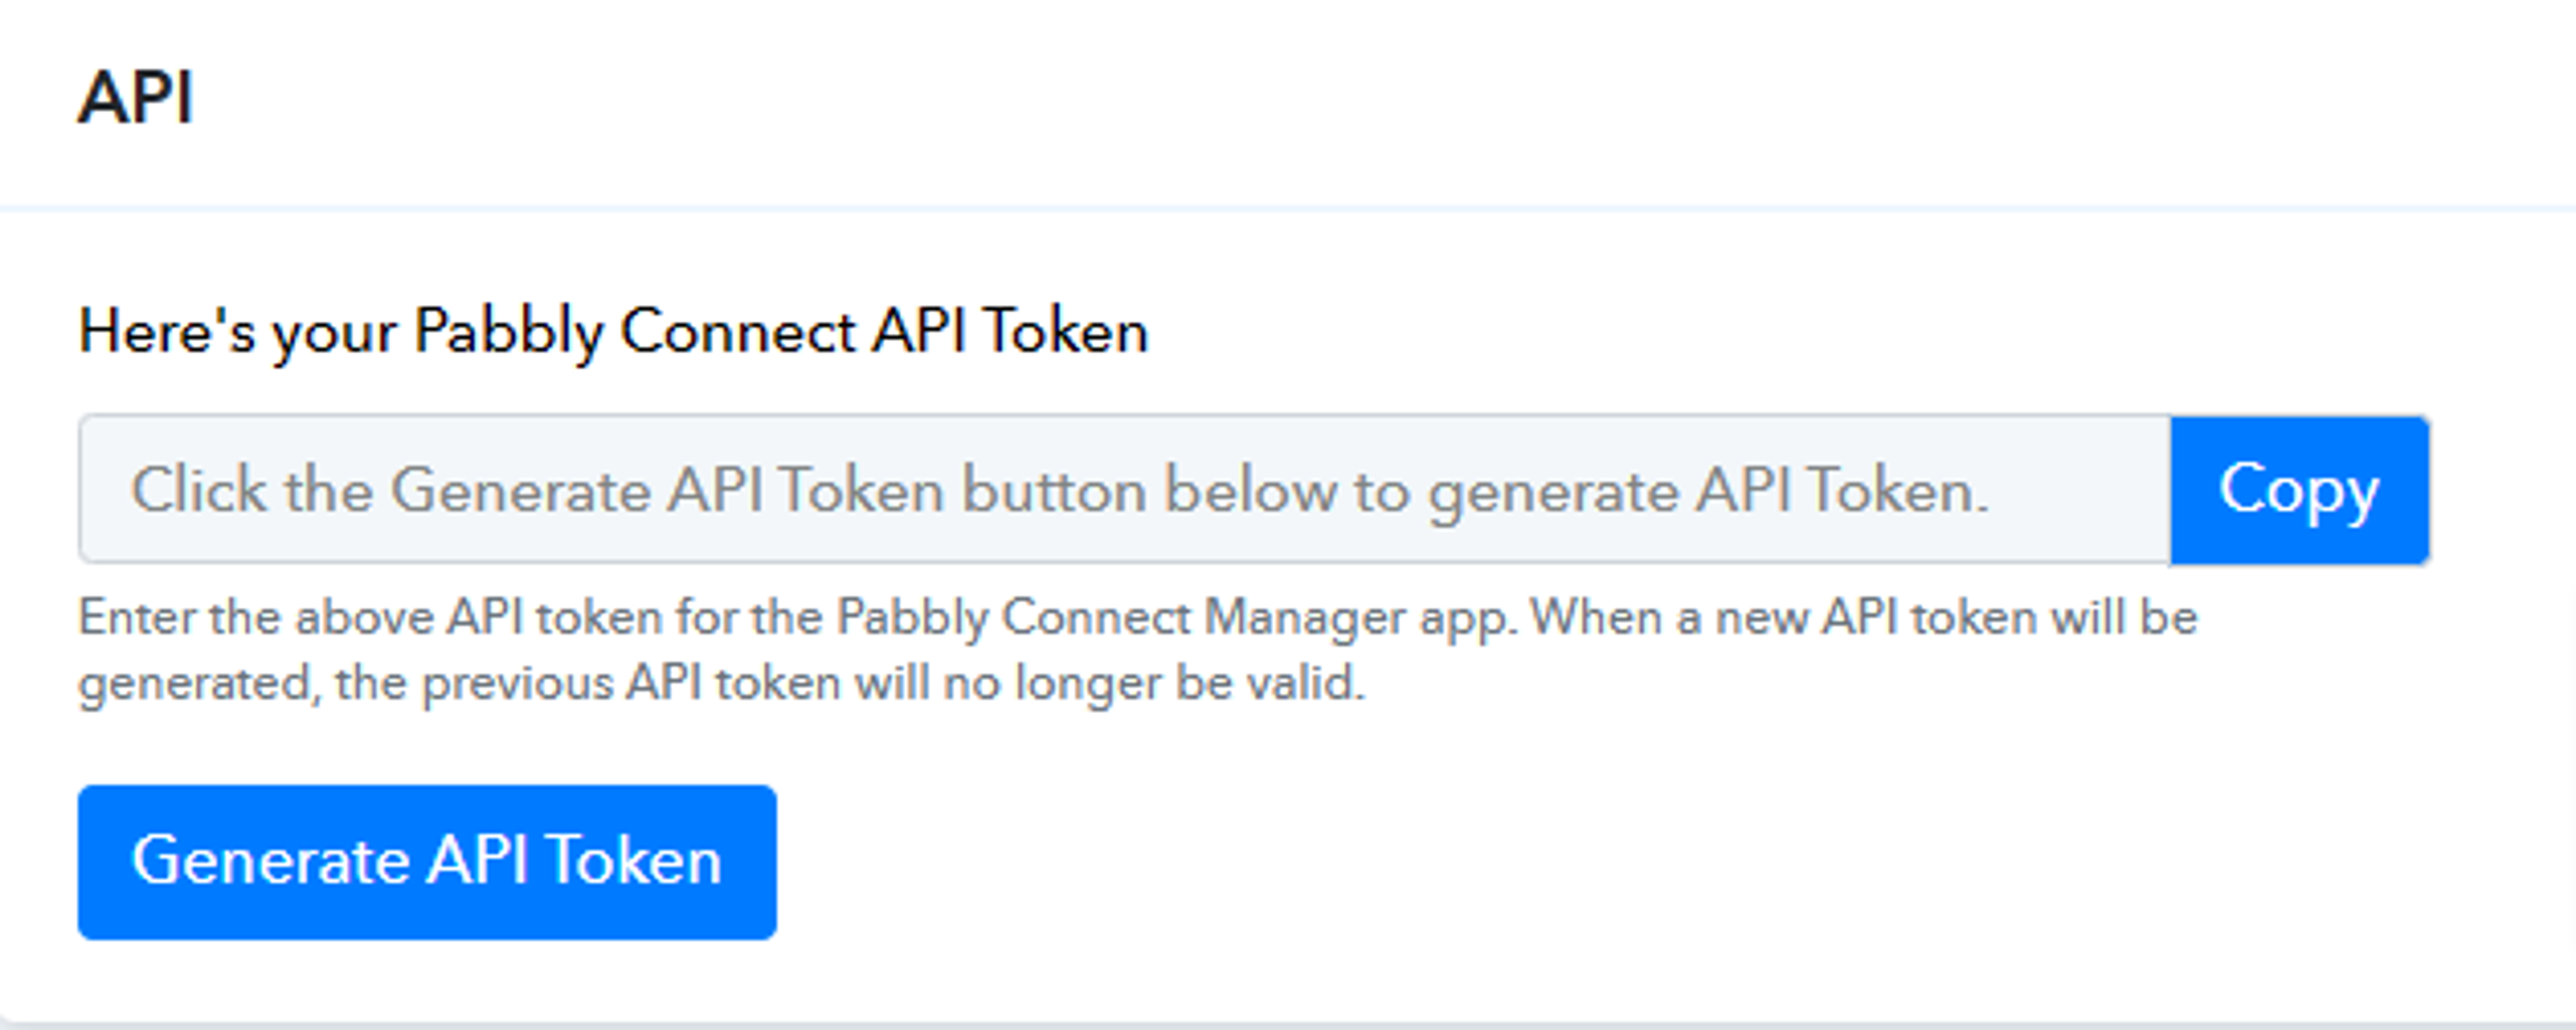 API by Pabbly Connect